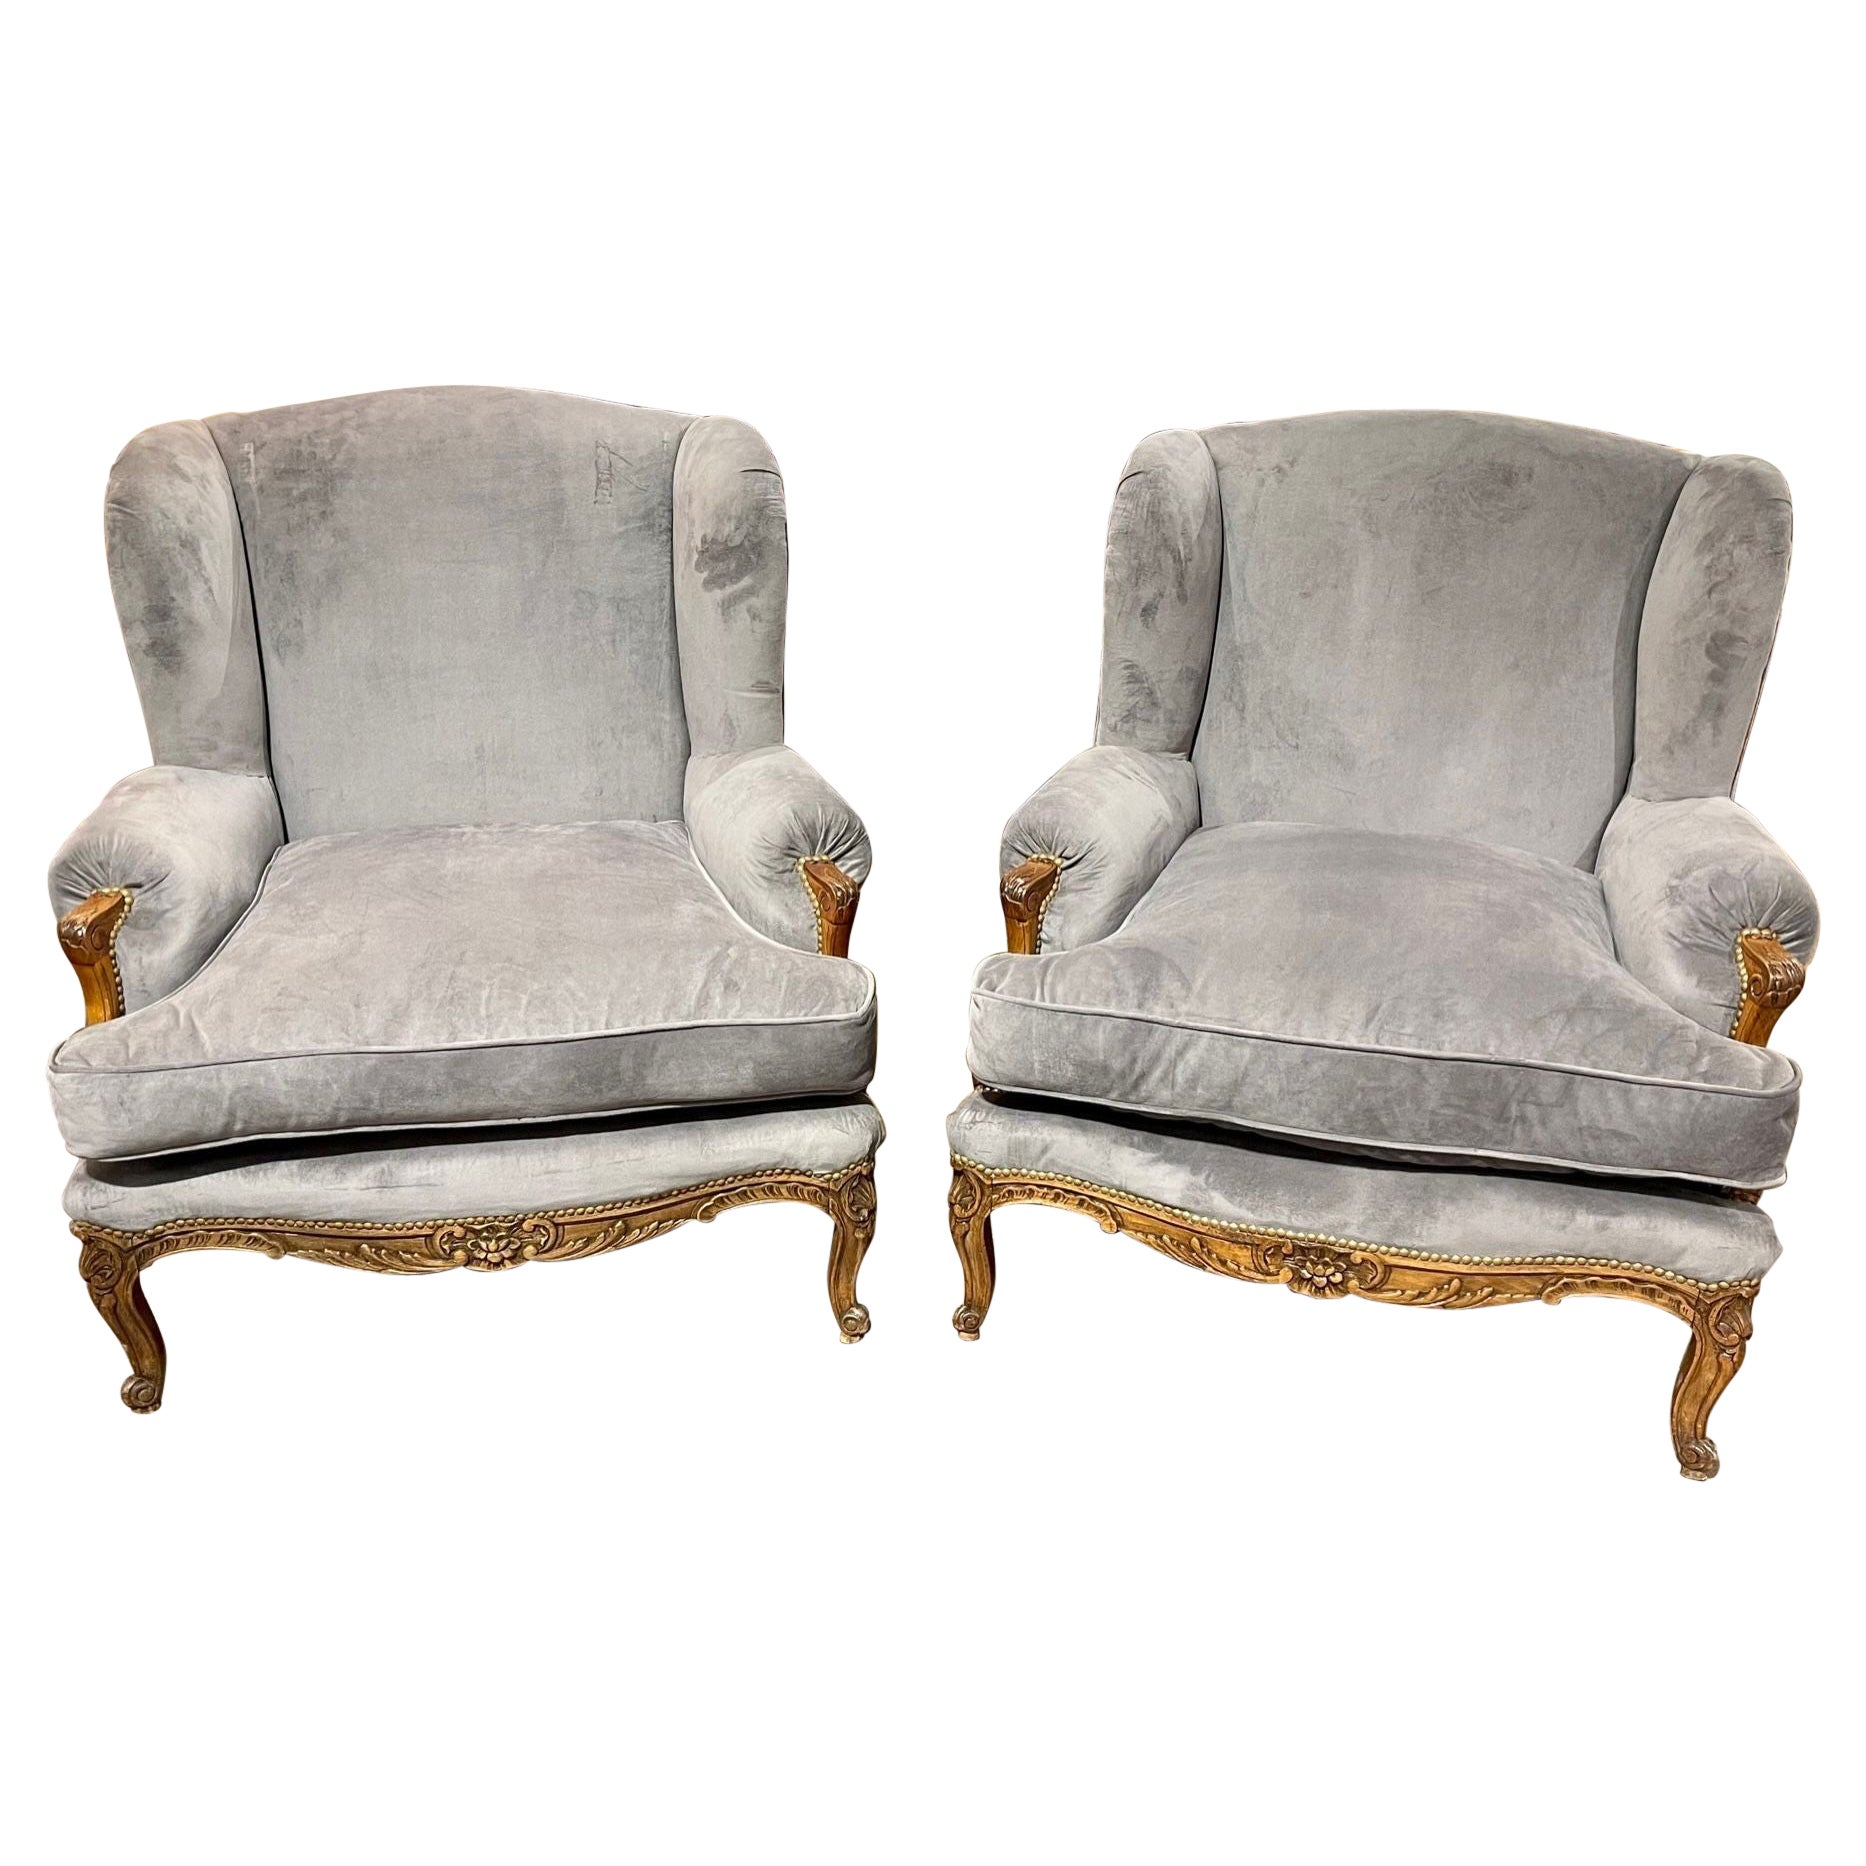 Pair of 19th Century French Provincial Style Bergeres